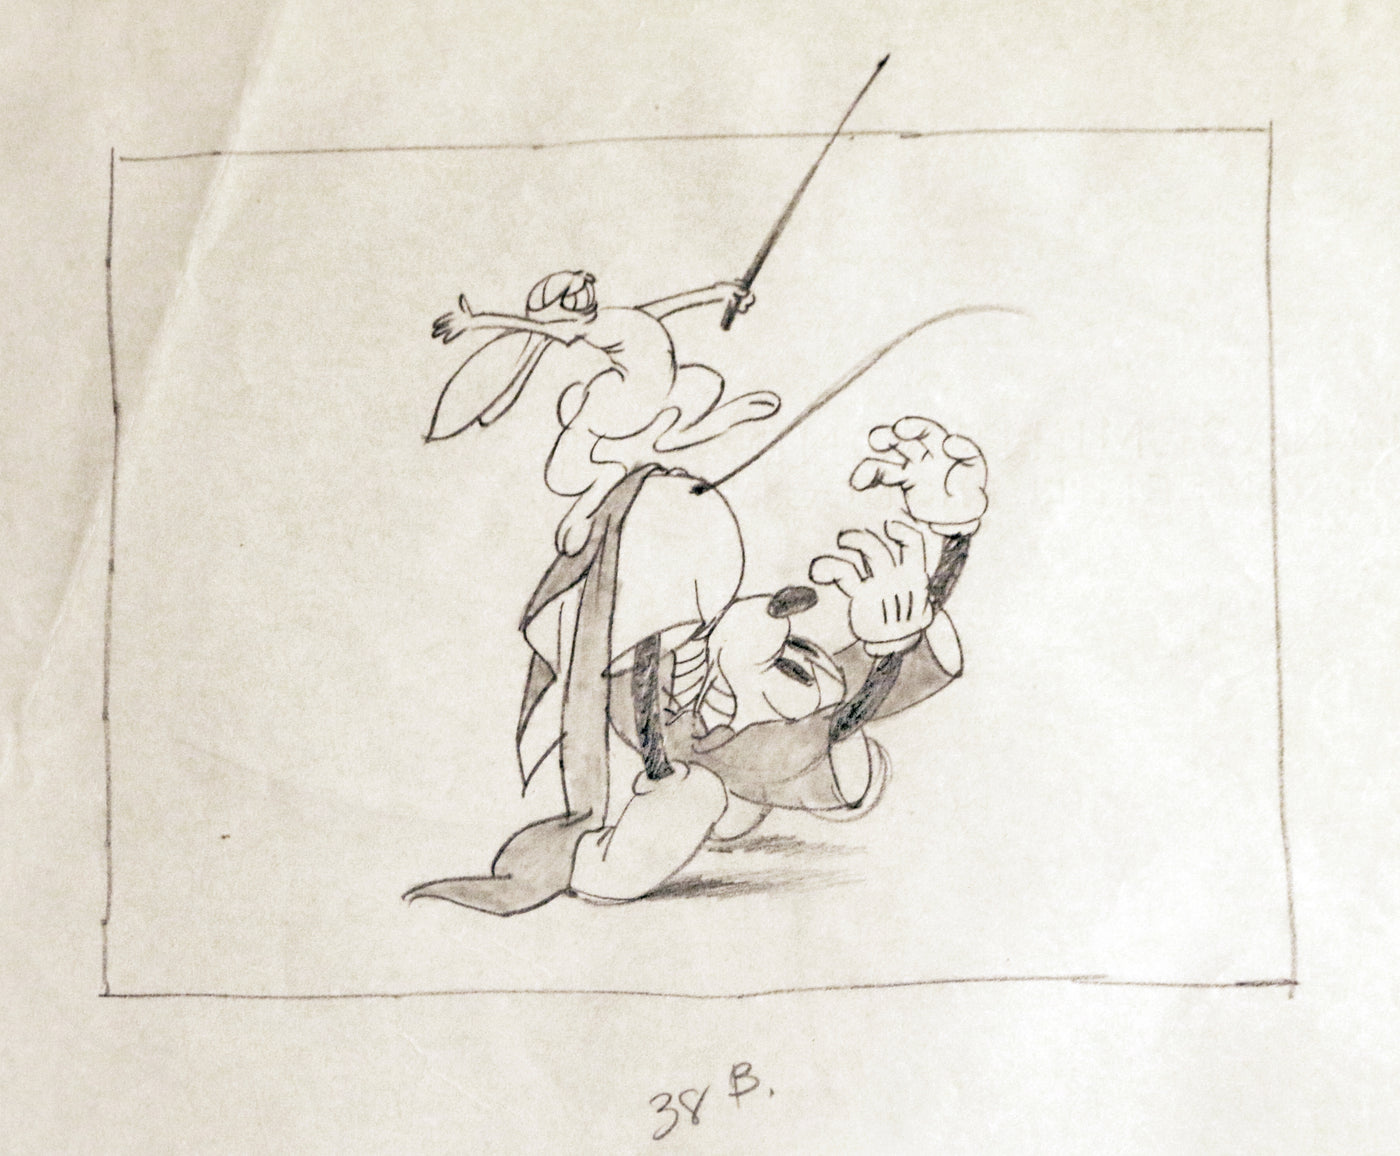 Original Walt Disney Production Drawing of Mickey Mouse from Mickey's Grand Opera (1936)